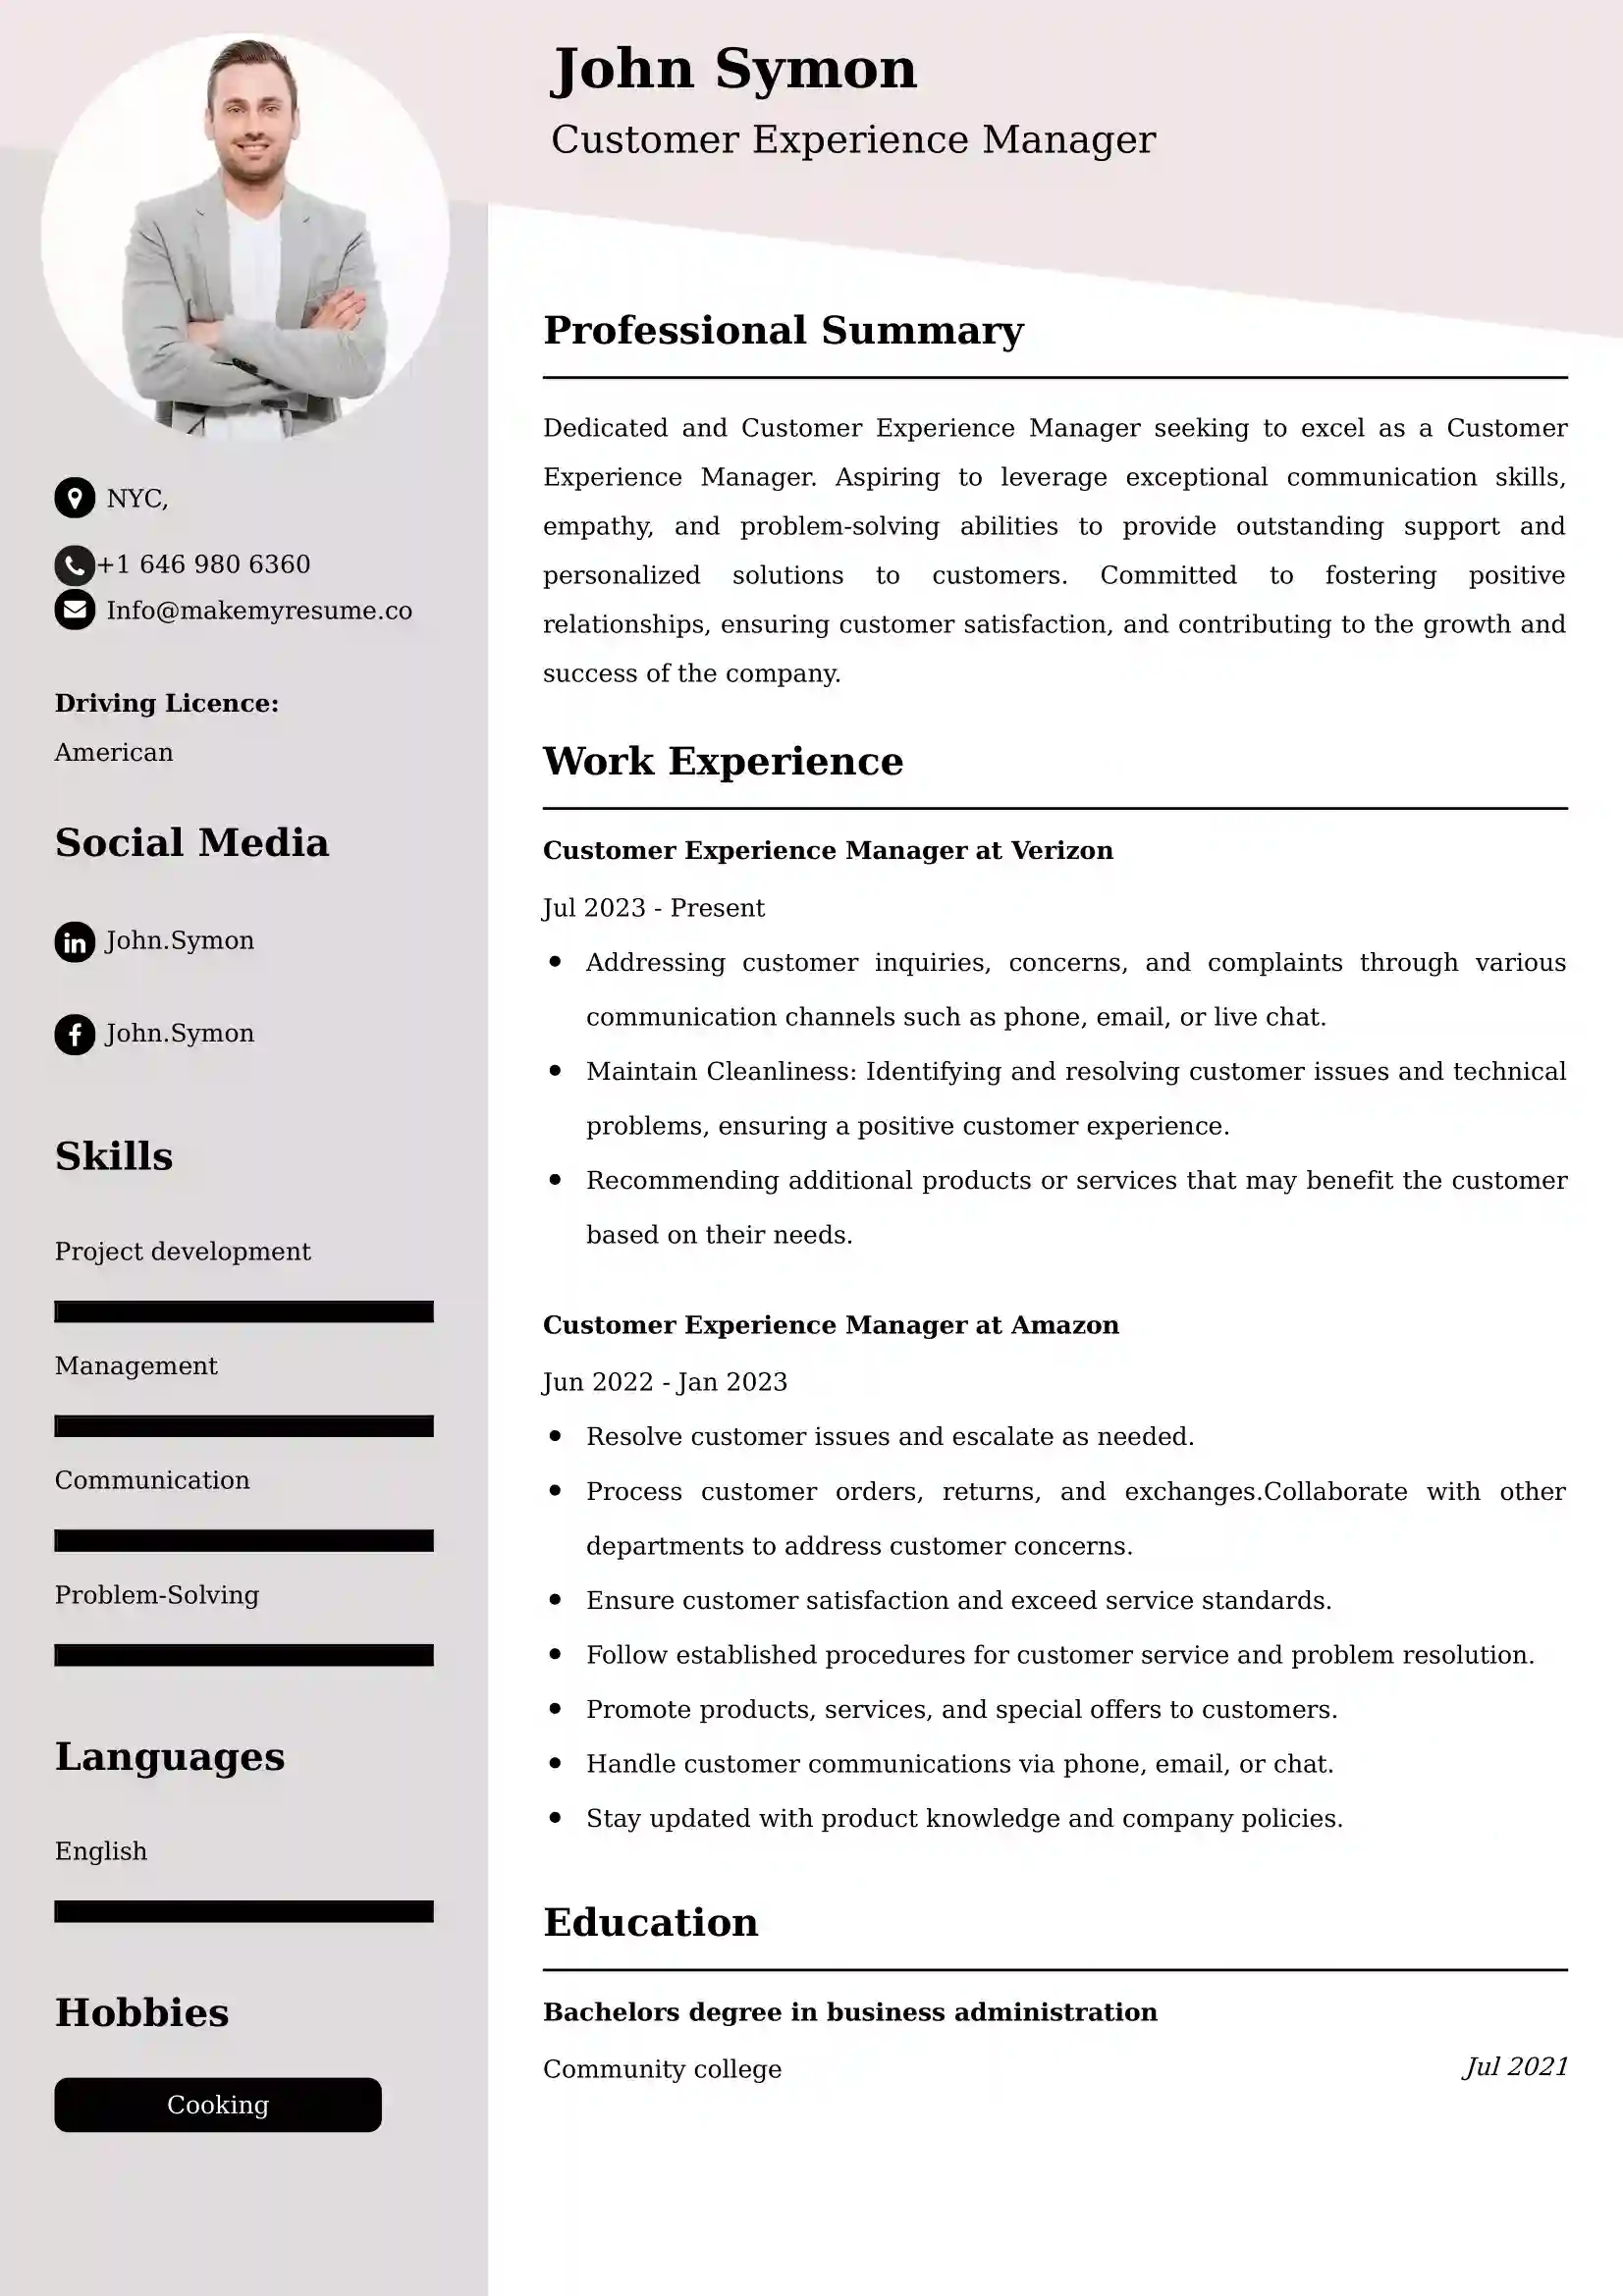 Customer Experience Manager Resume Examples - Brazilian Format, Latest Template